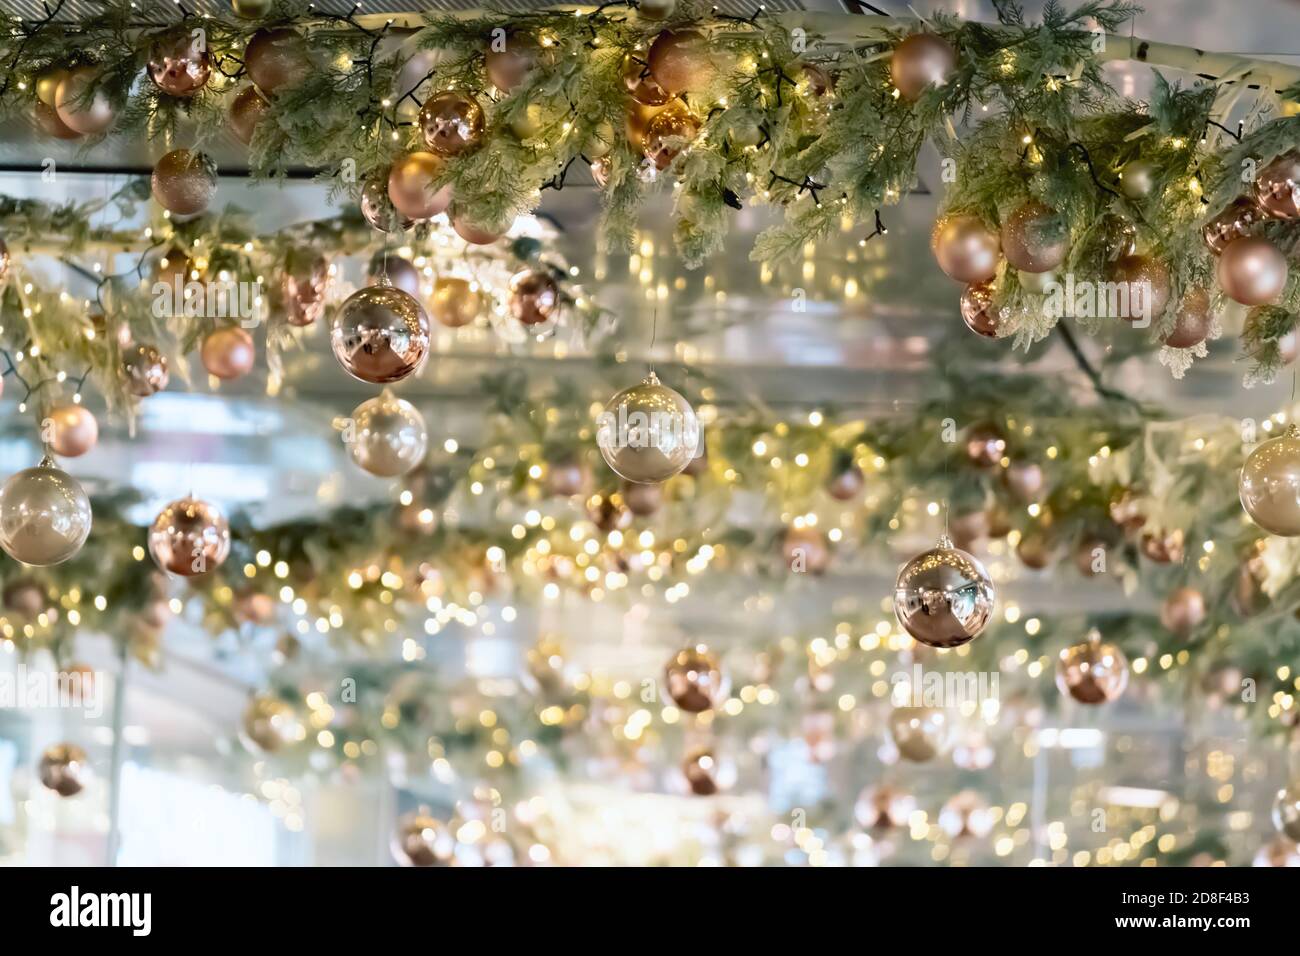 Christmas decorations hanging from ceiling in modern mall ...